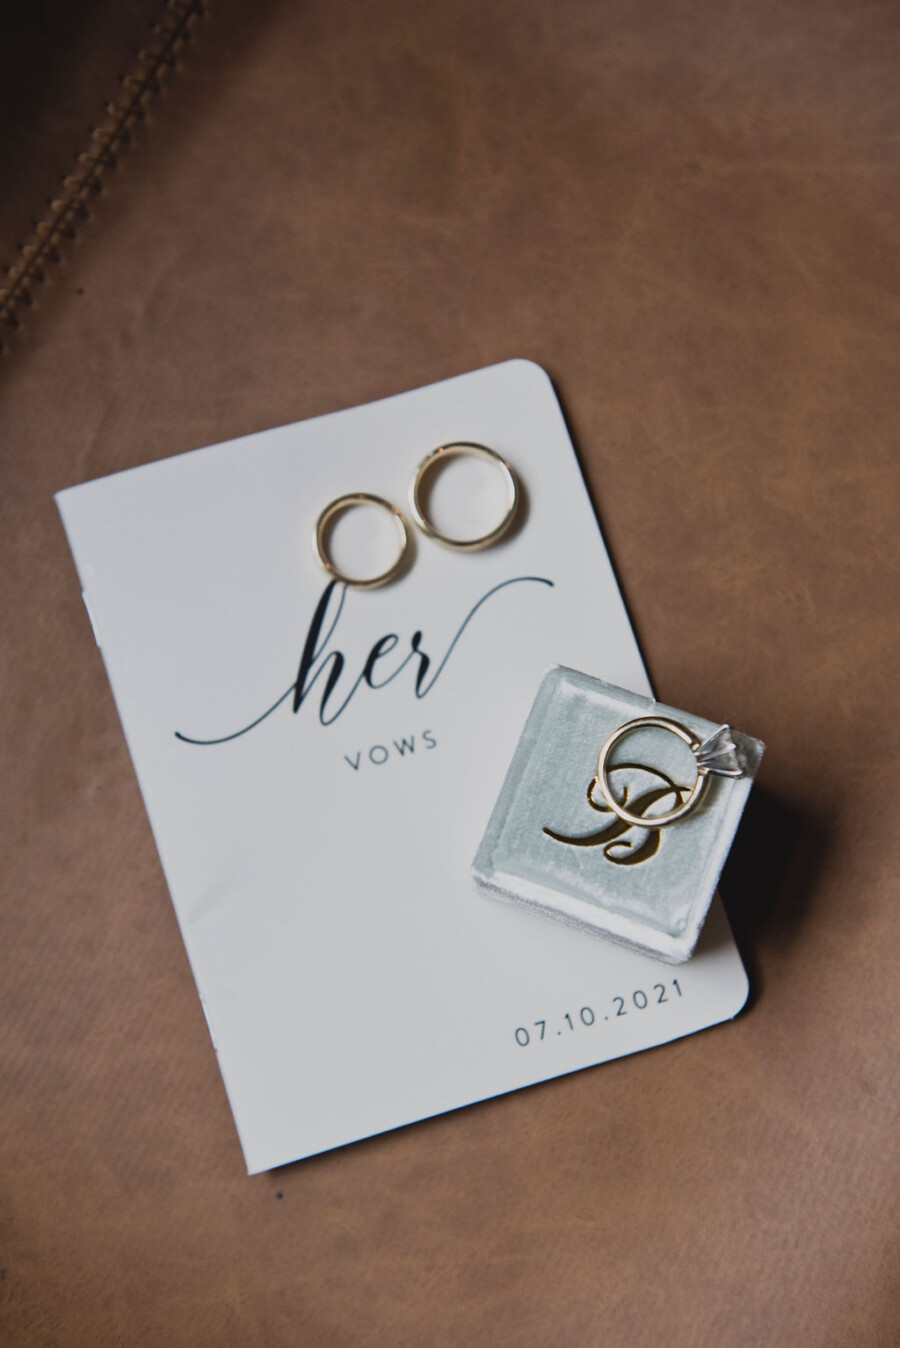 Wedding vow books and wedding rings